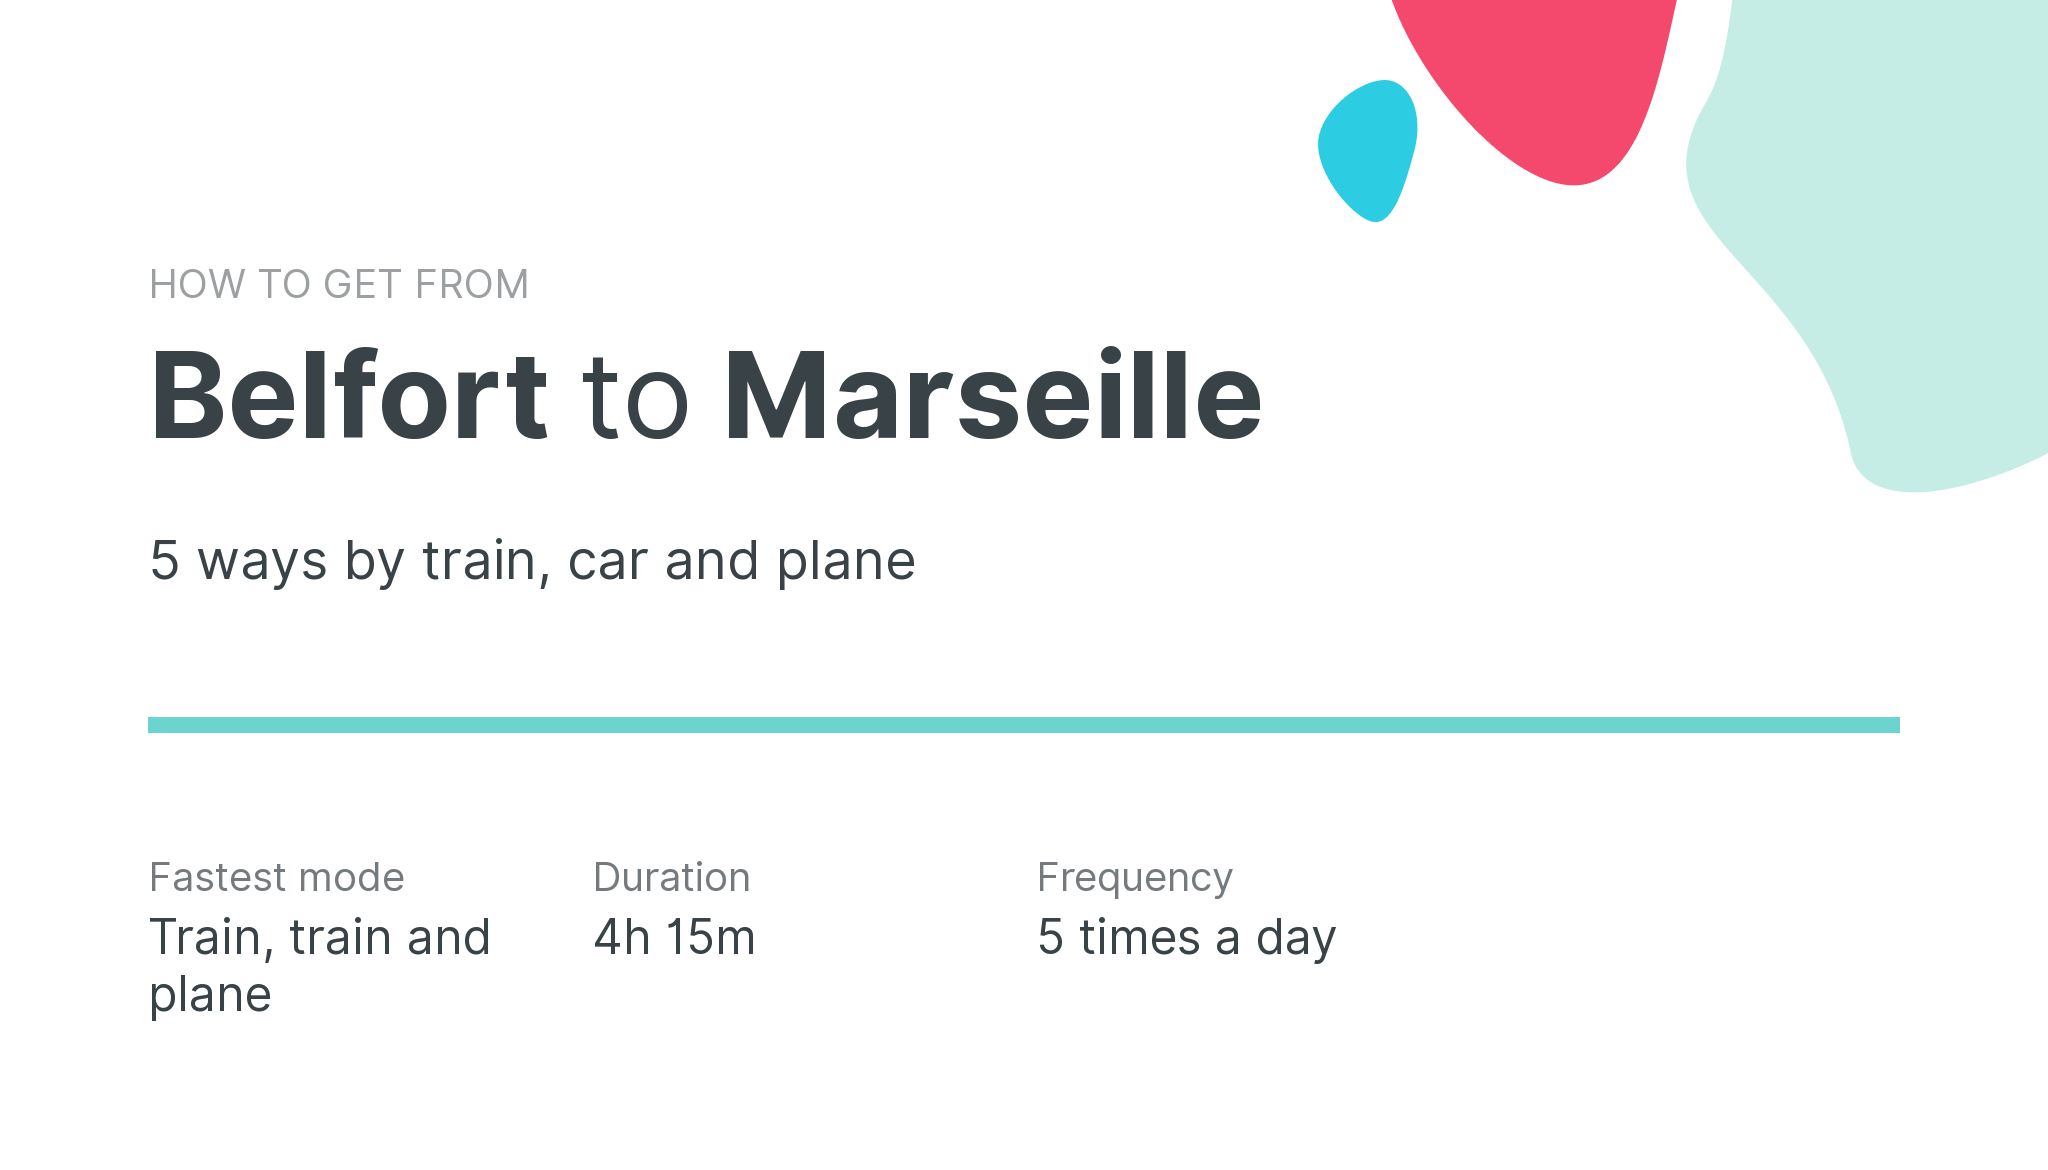 How do I get from Belfort to Marseille